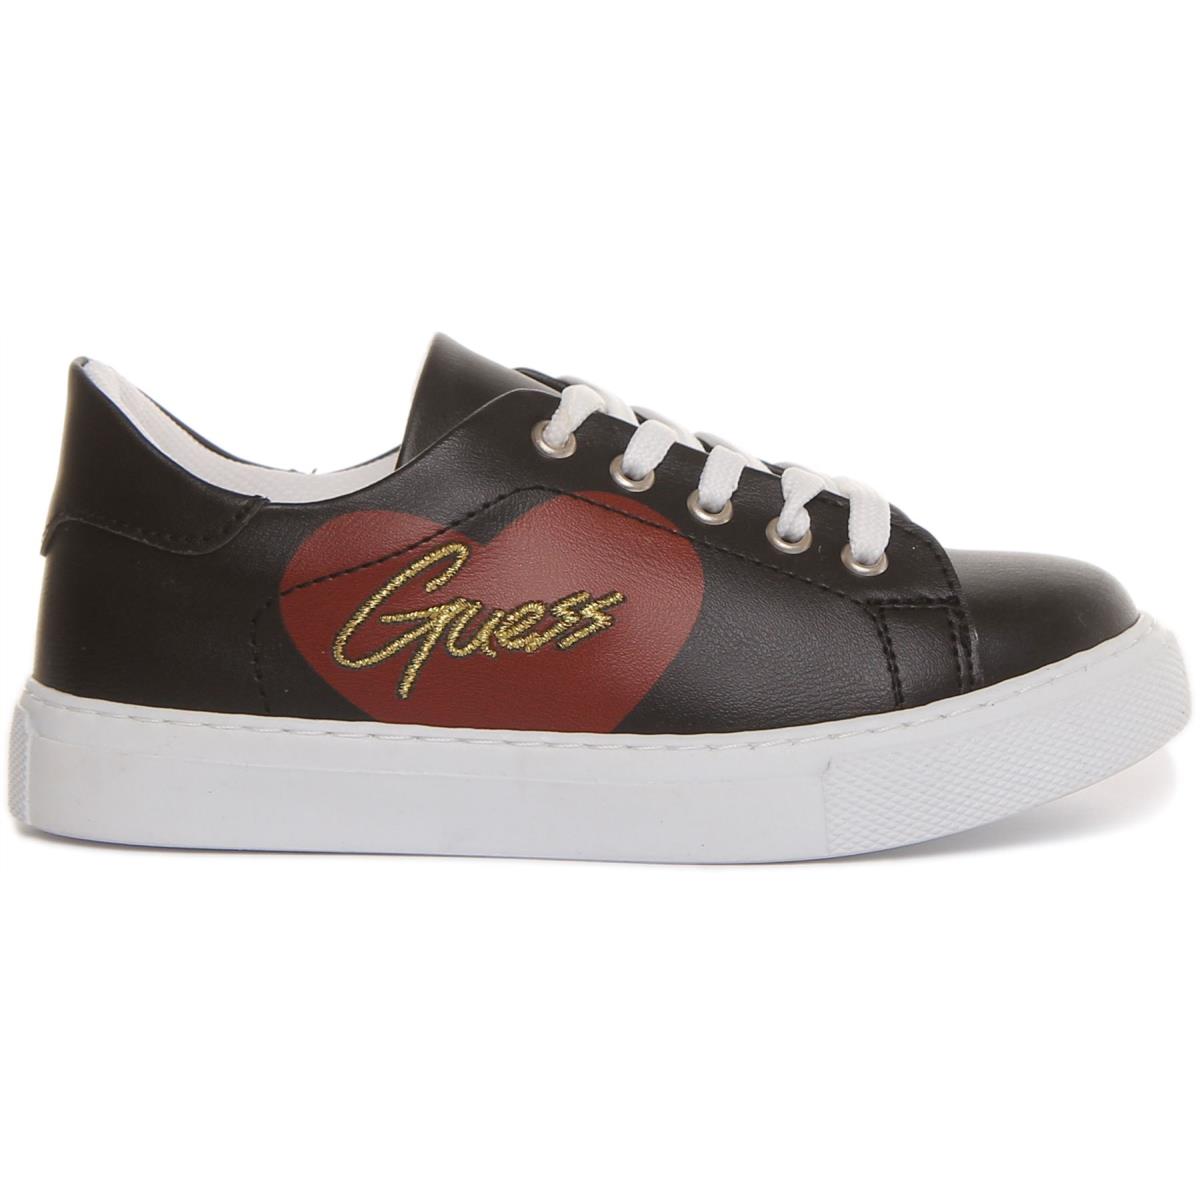 Guess Ellie Lace up Girls Kids Heart Print Trainer Black Red Size US 8 - 2